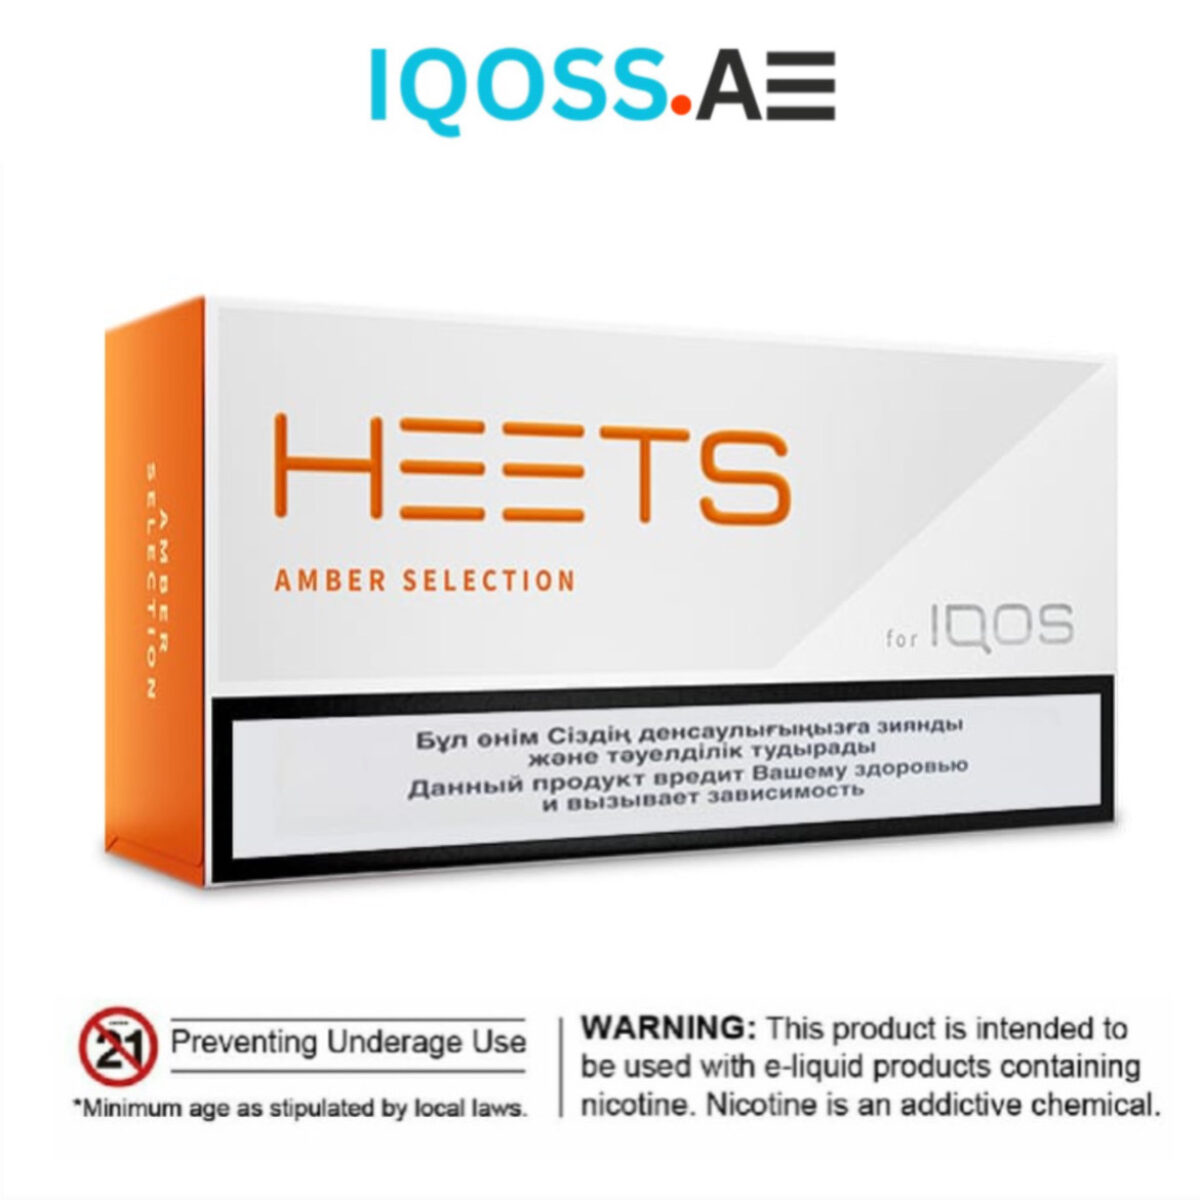 IQOS HEETS AMBER SELECTION TOBACCO STICKS